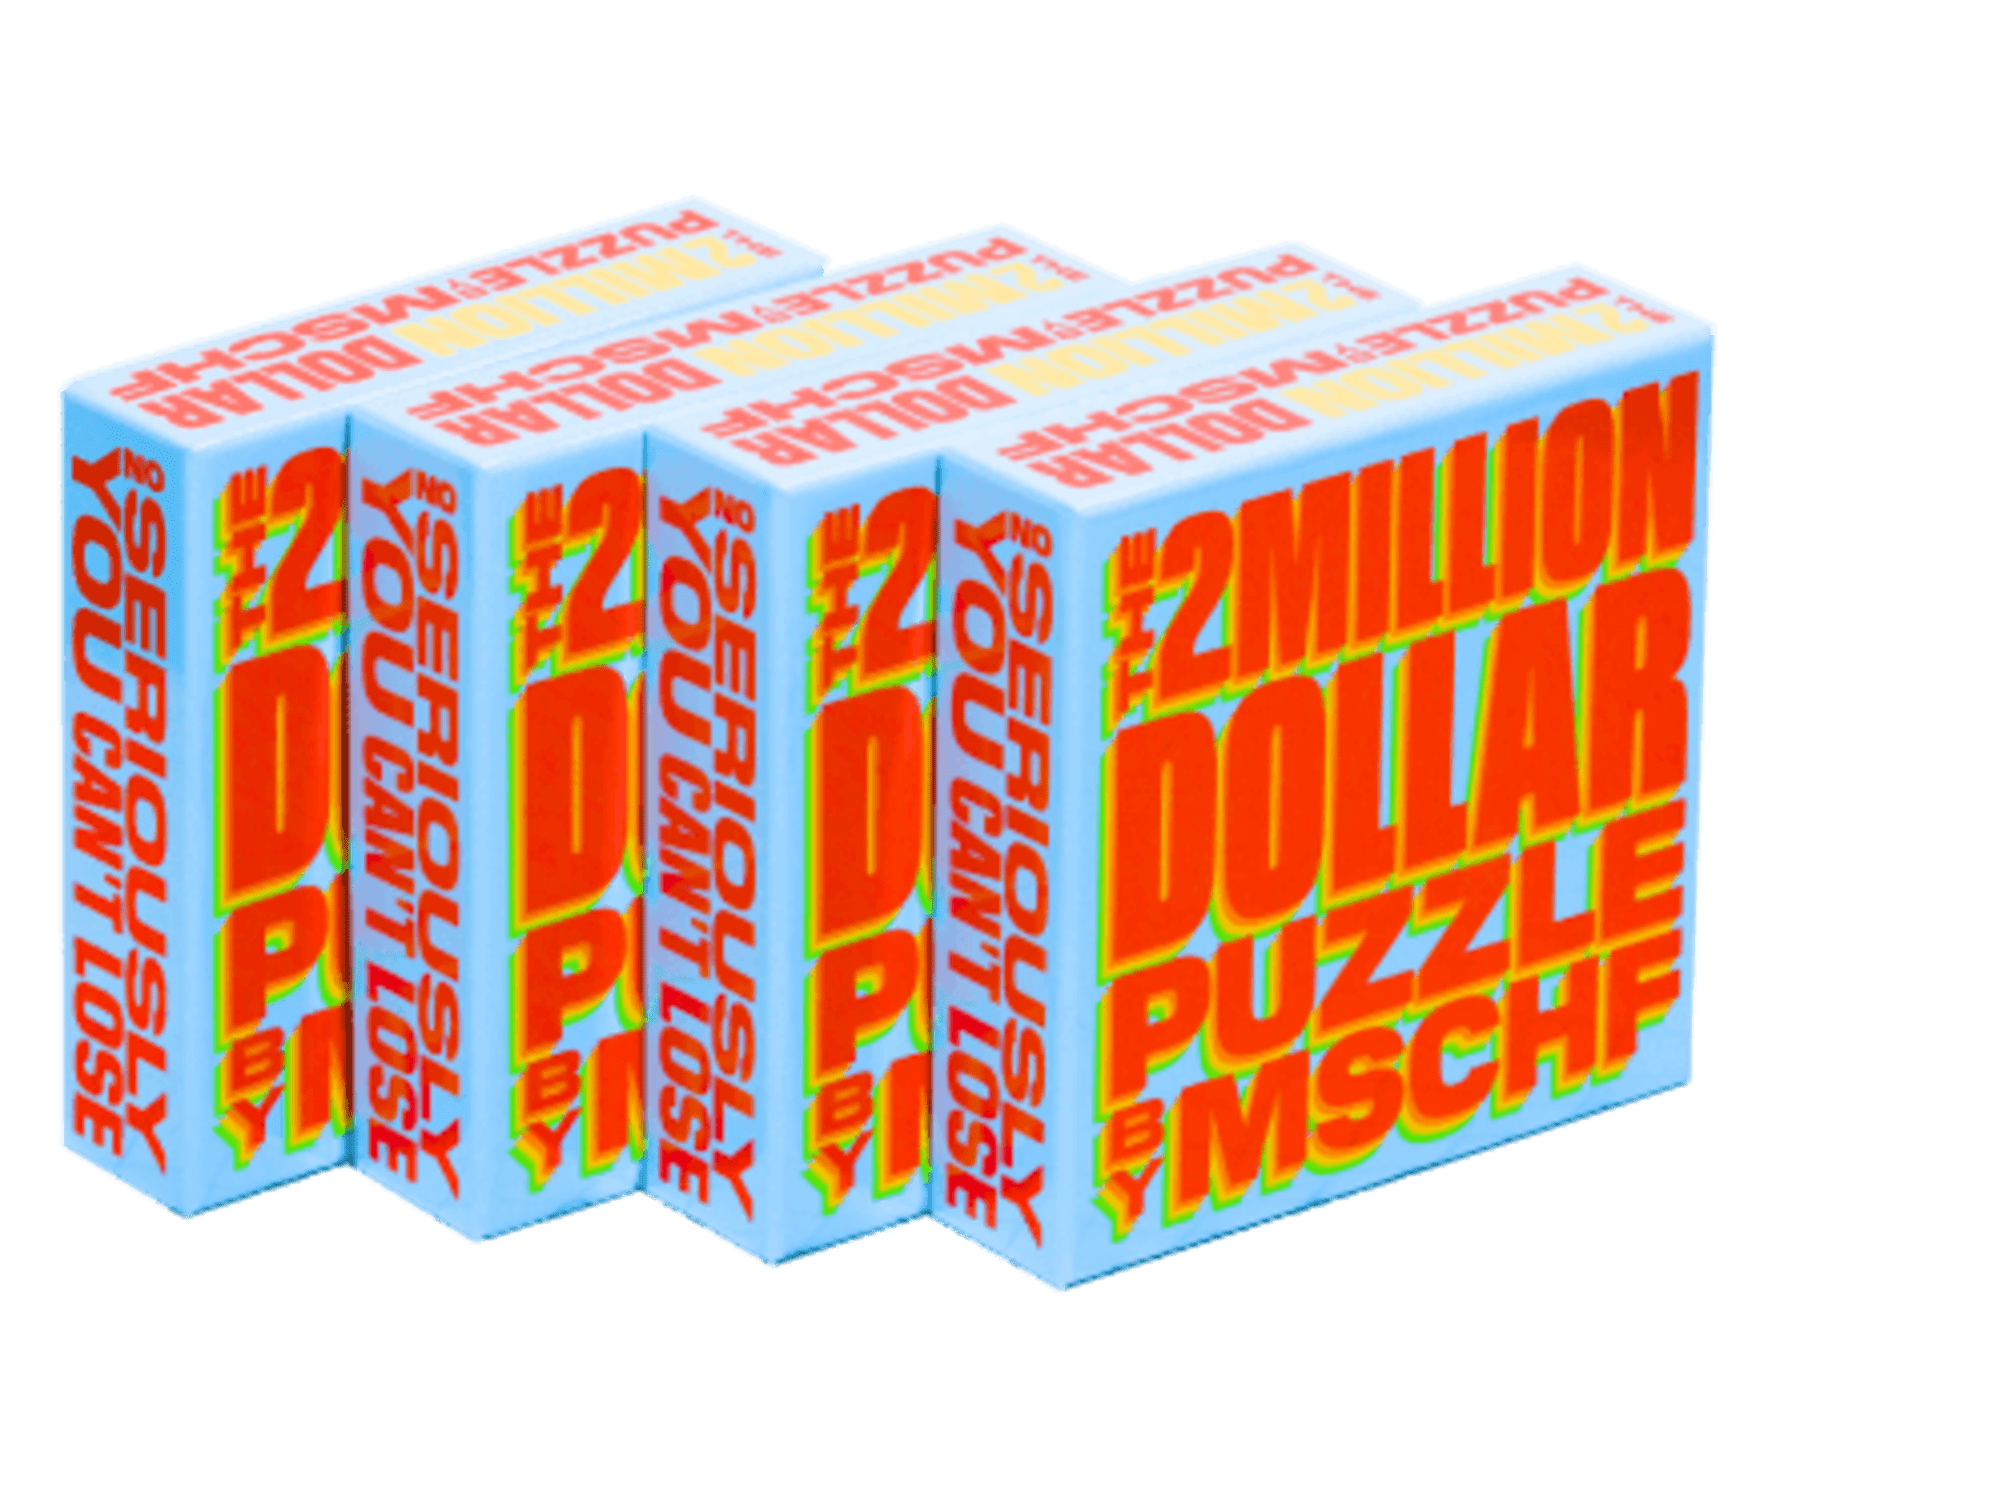 This puzzle gives out cash prizes and makes a great gift for the holidays